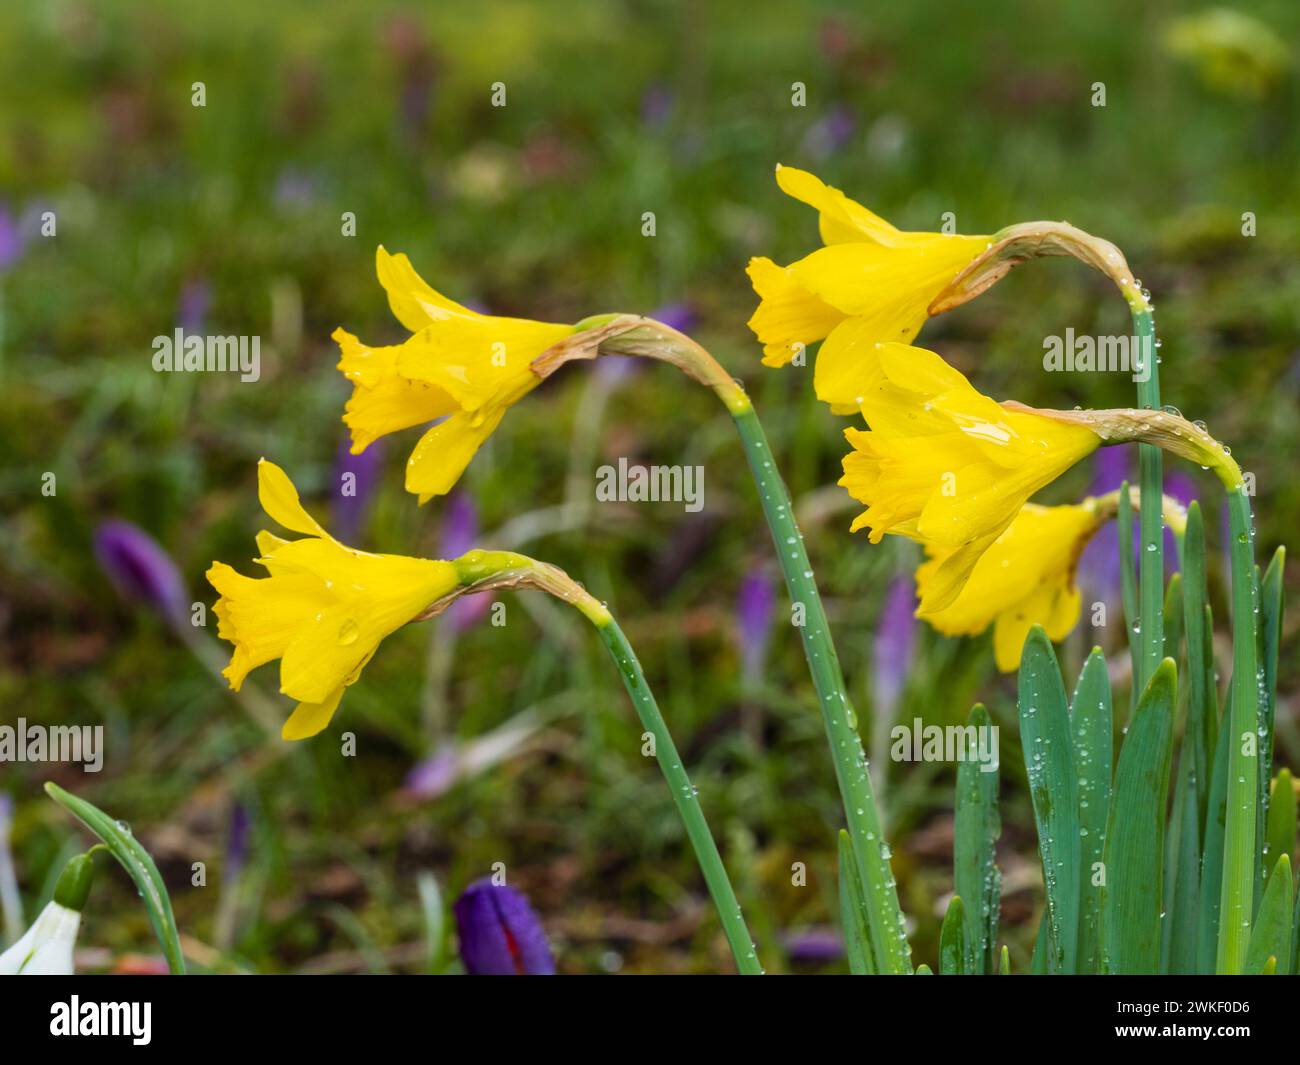 Late winter flowering yellow trumpets of the Welsh daffodil or Lent lily, Narcissus pseudonarcissus Stock Photo